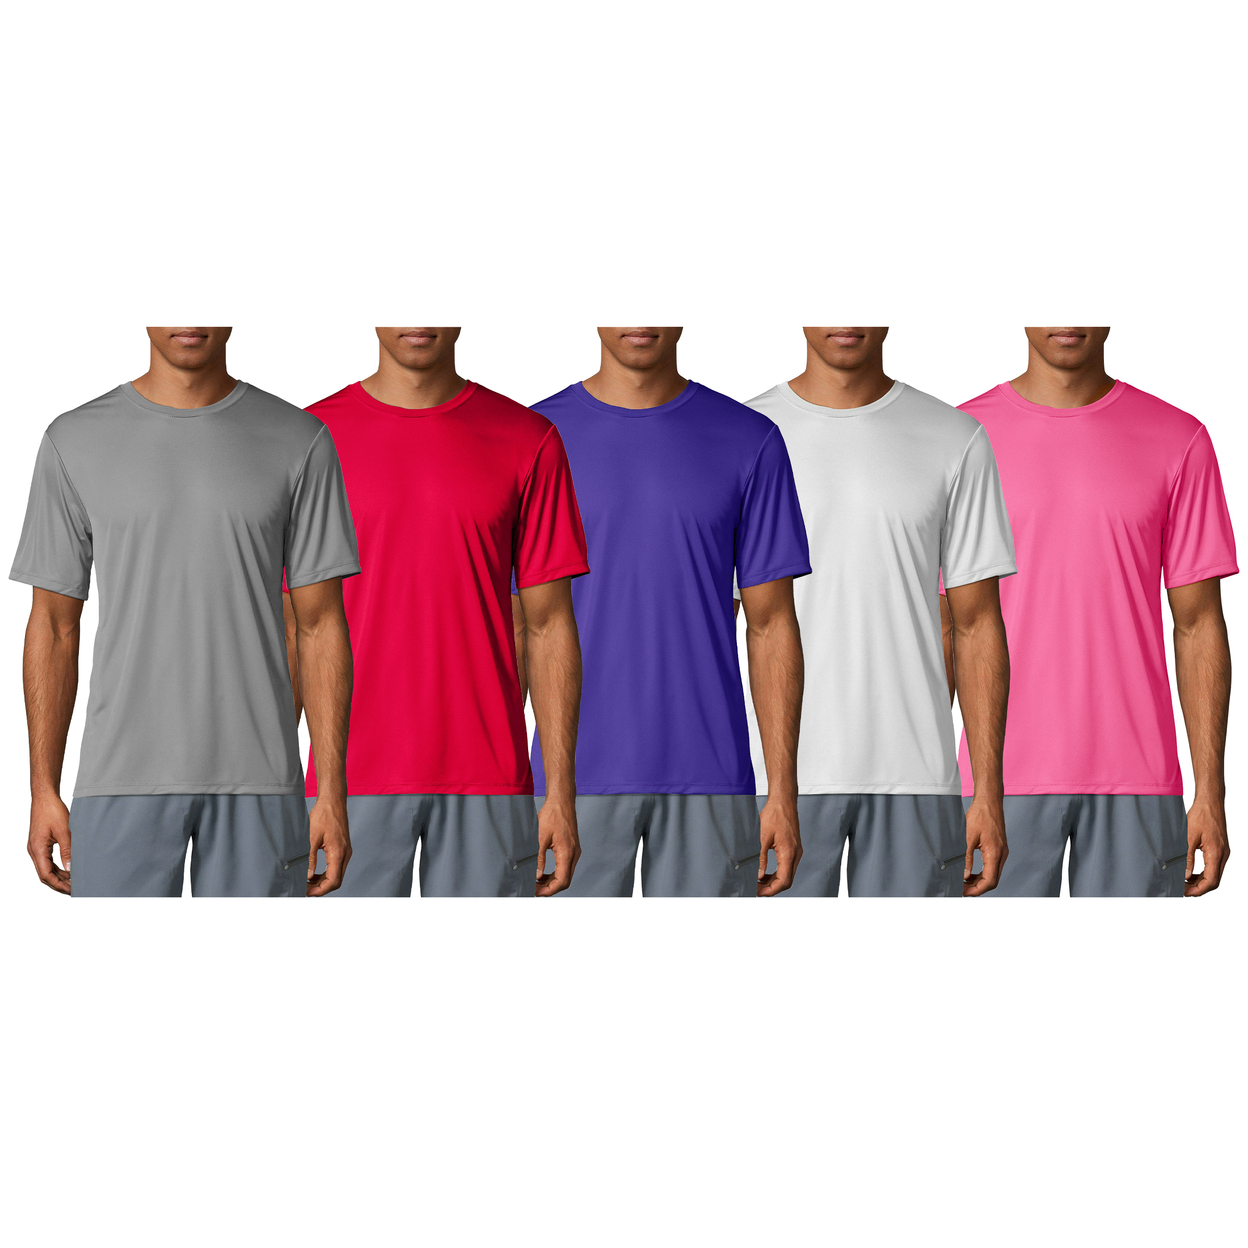 Multi-Pack: Men's Moisture Wicking Cool Dri-Fit Performance Short Sleeve Crew Neck T-Shirts - 1-pack, X-large